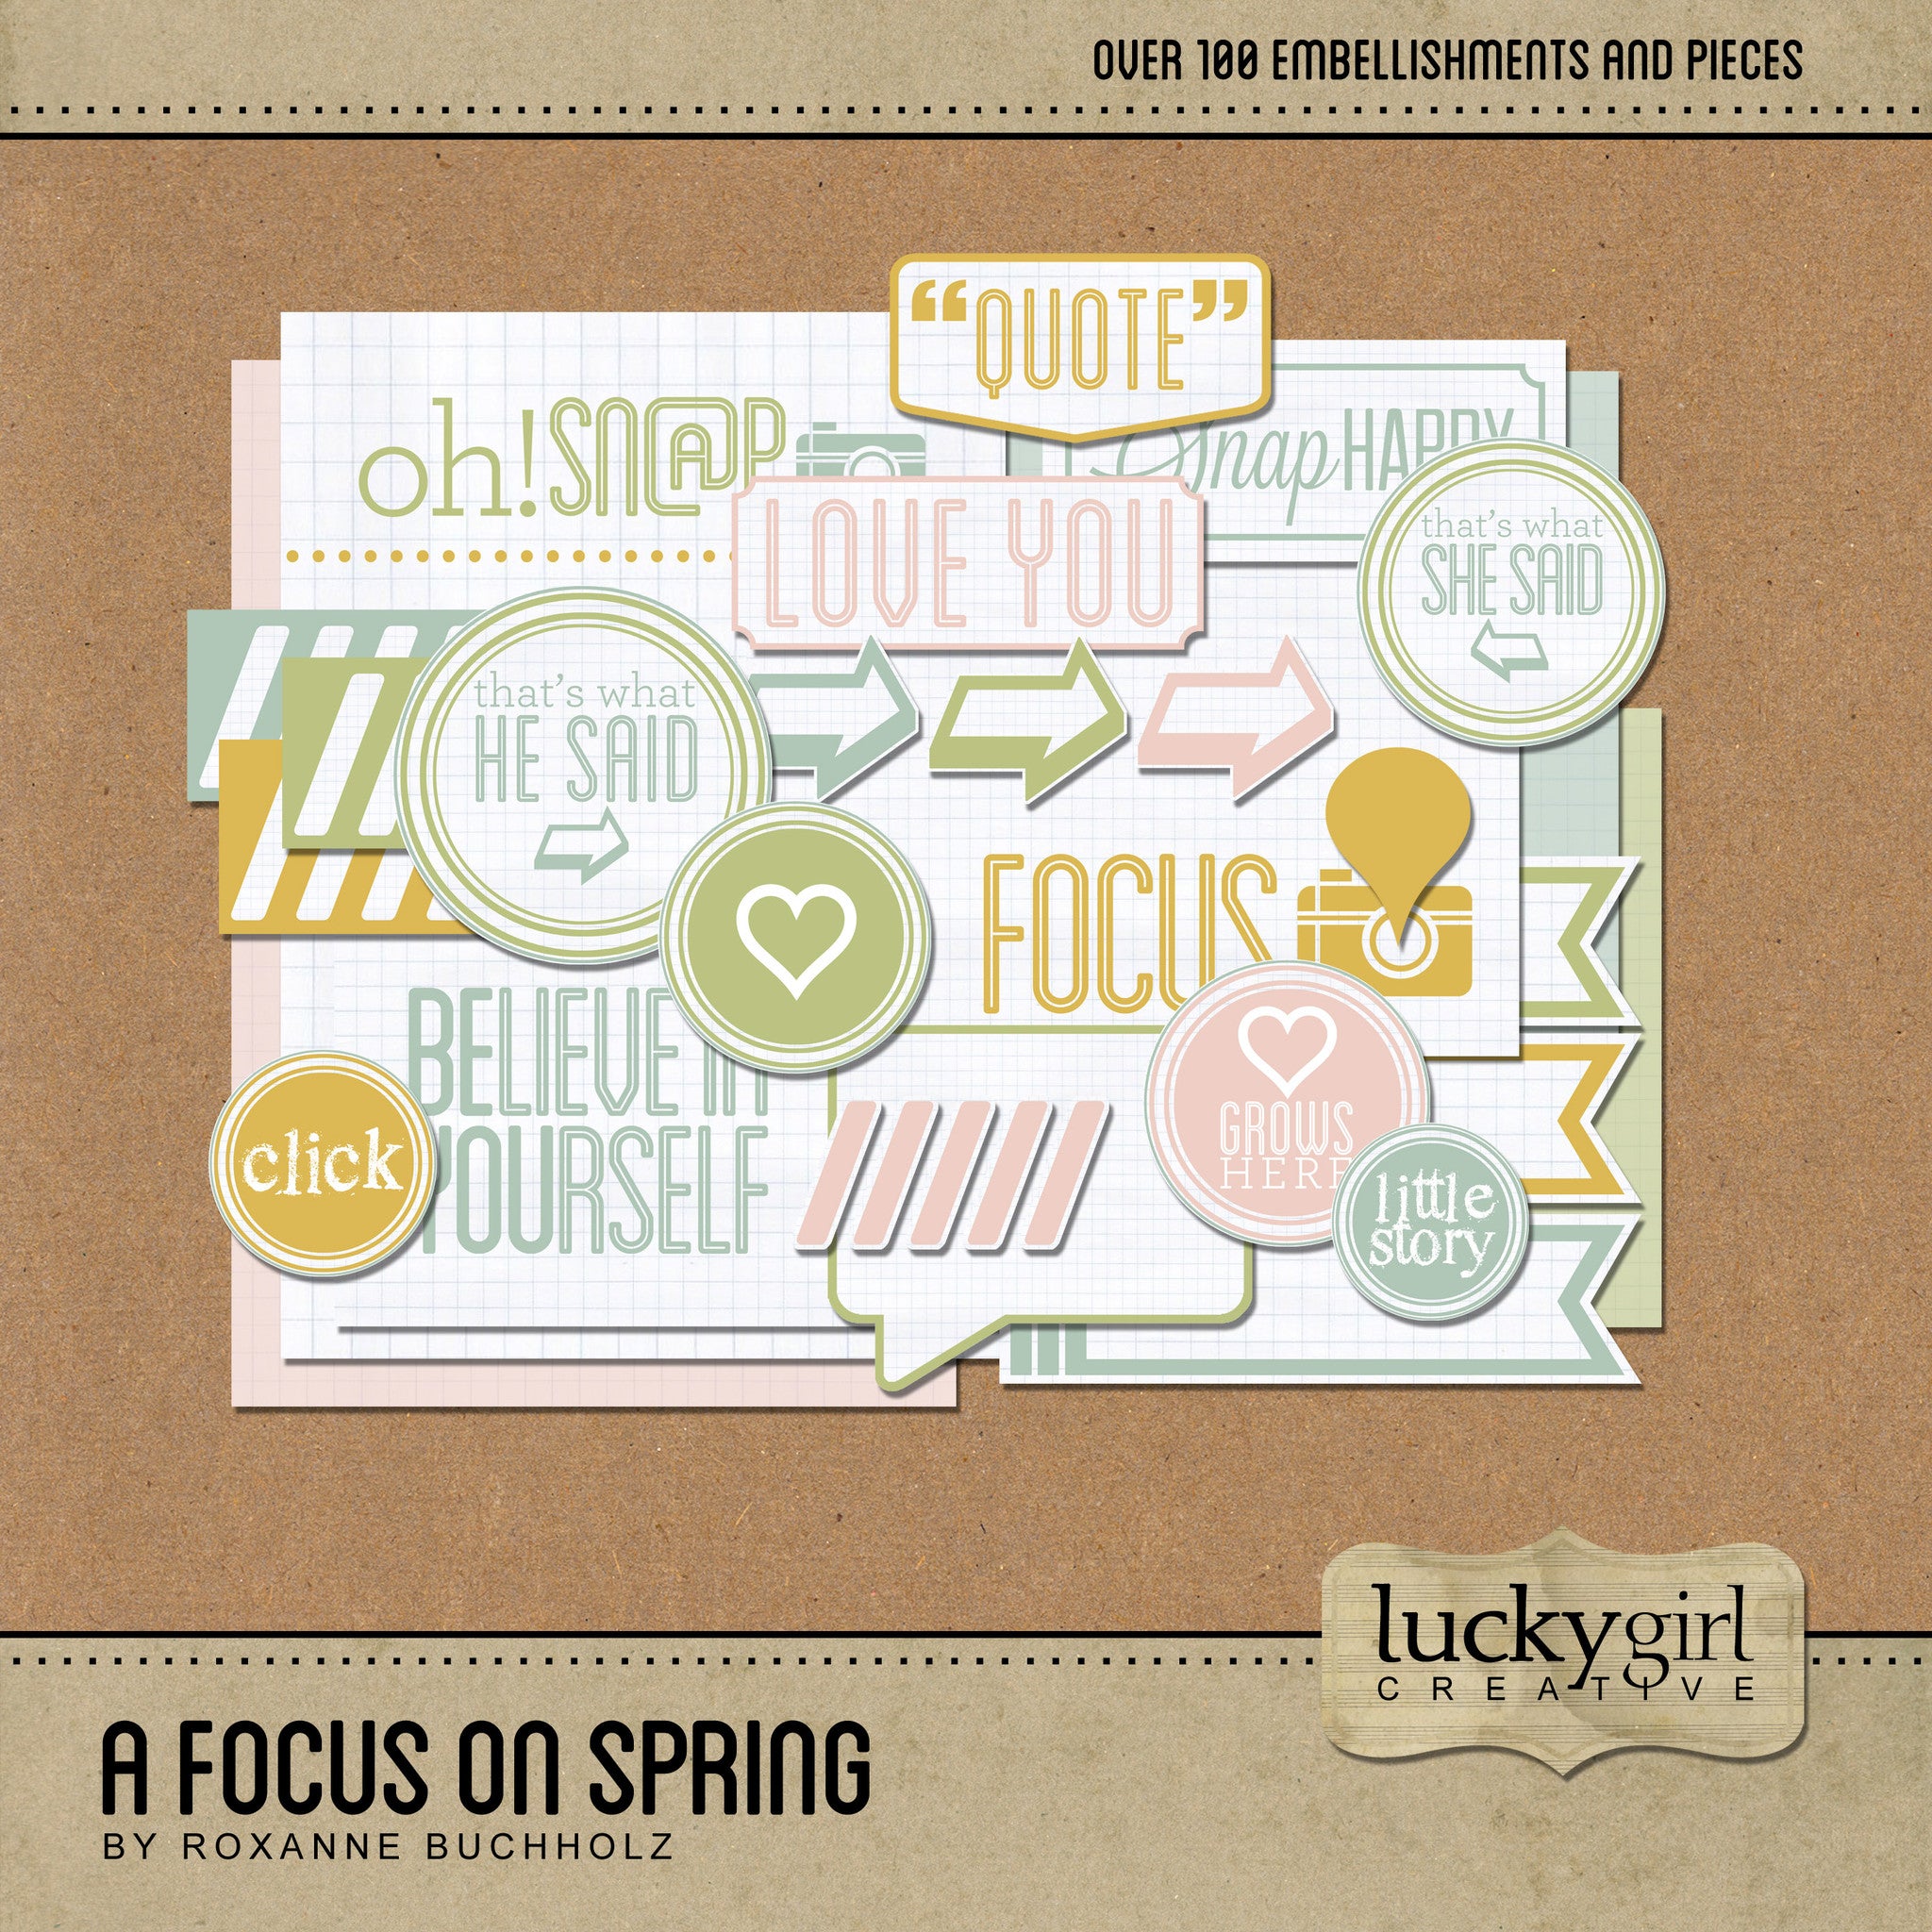 A Focus on Spring Digital Scrapbook Kit is a huge “Project Life” inspired digital art collection full of clean and crisp ways to document life, all made in gentle and versatile colors that can add value to a page or project of any kind at any time of year. The 4 x 6 and 6 x 4 pieces were specifically designed with “Project Life” in mind but multiple pieces and embellishments which can be mixed and matched to create your own cards.